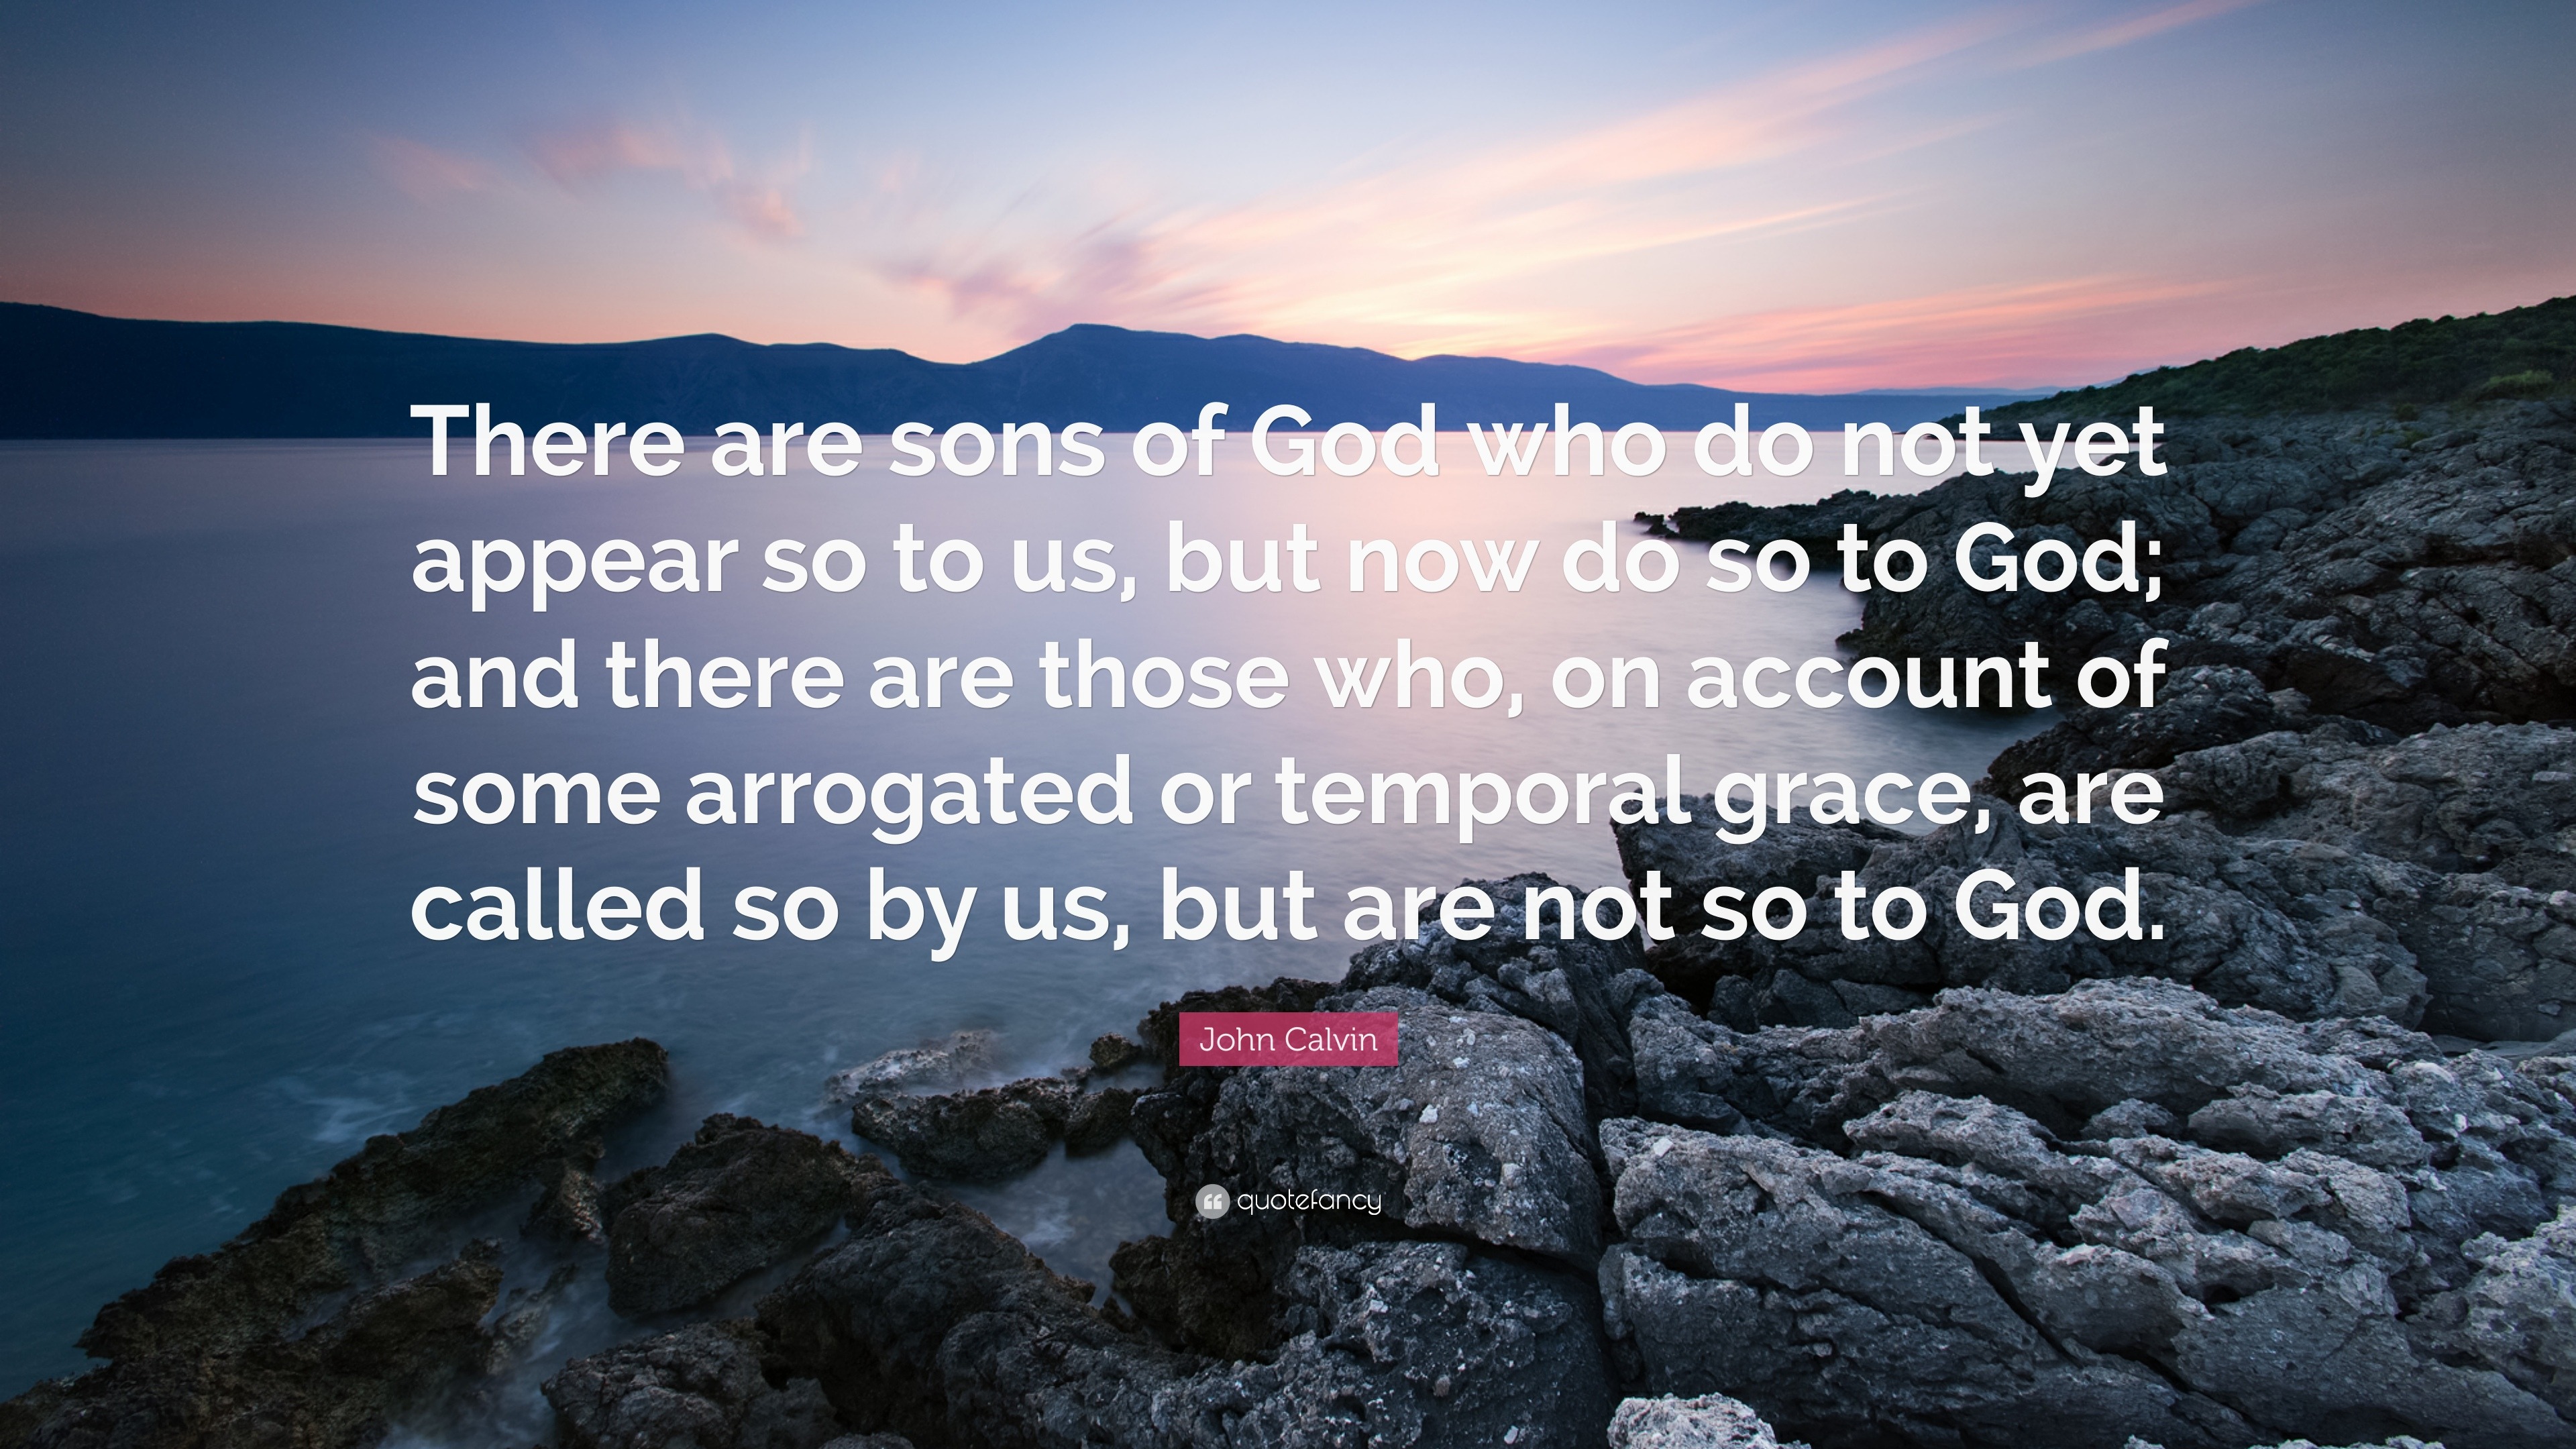 John Calvin Quote: “There are sons of God who do not yet appear so to ...